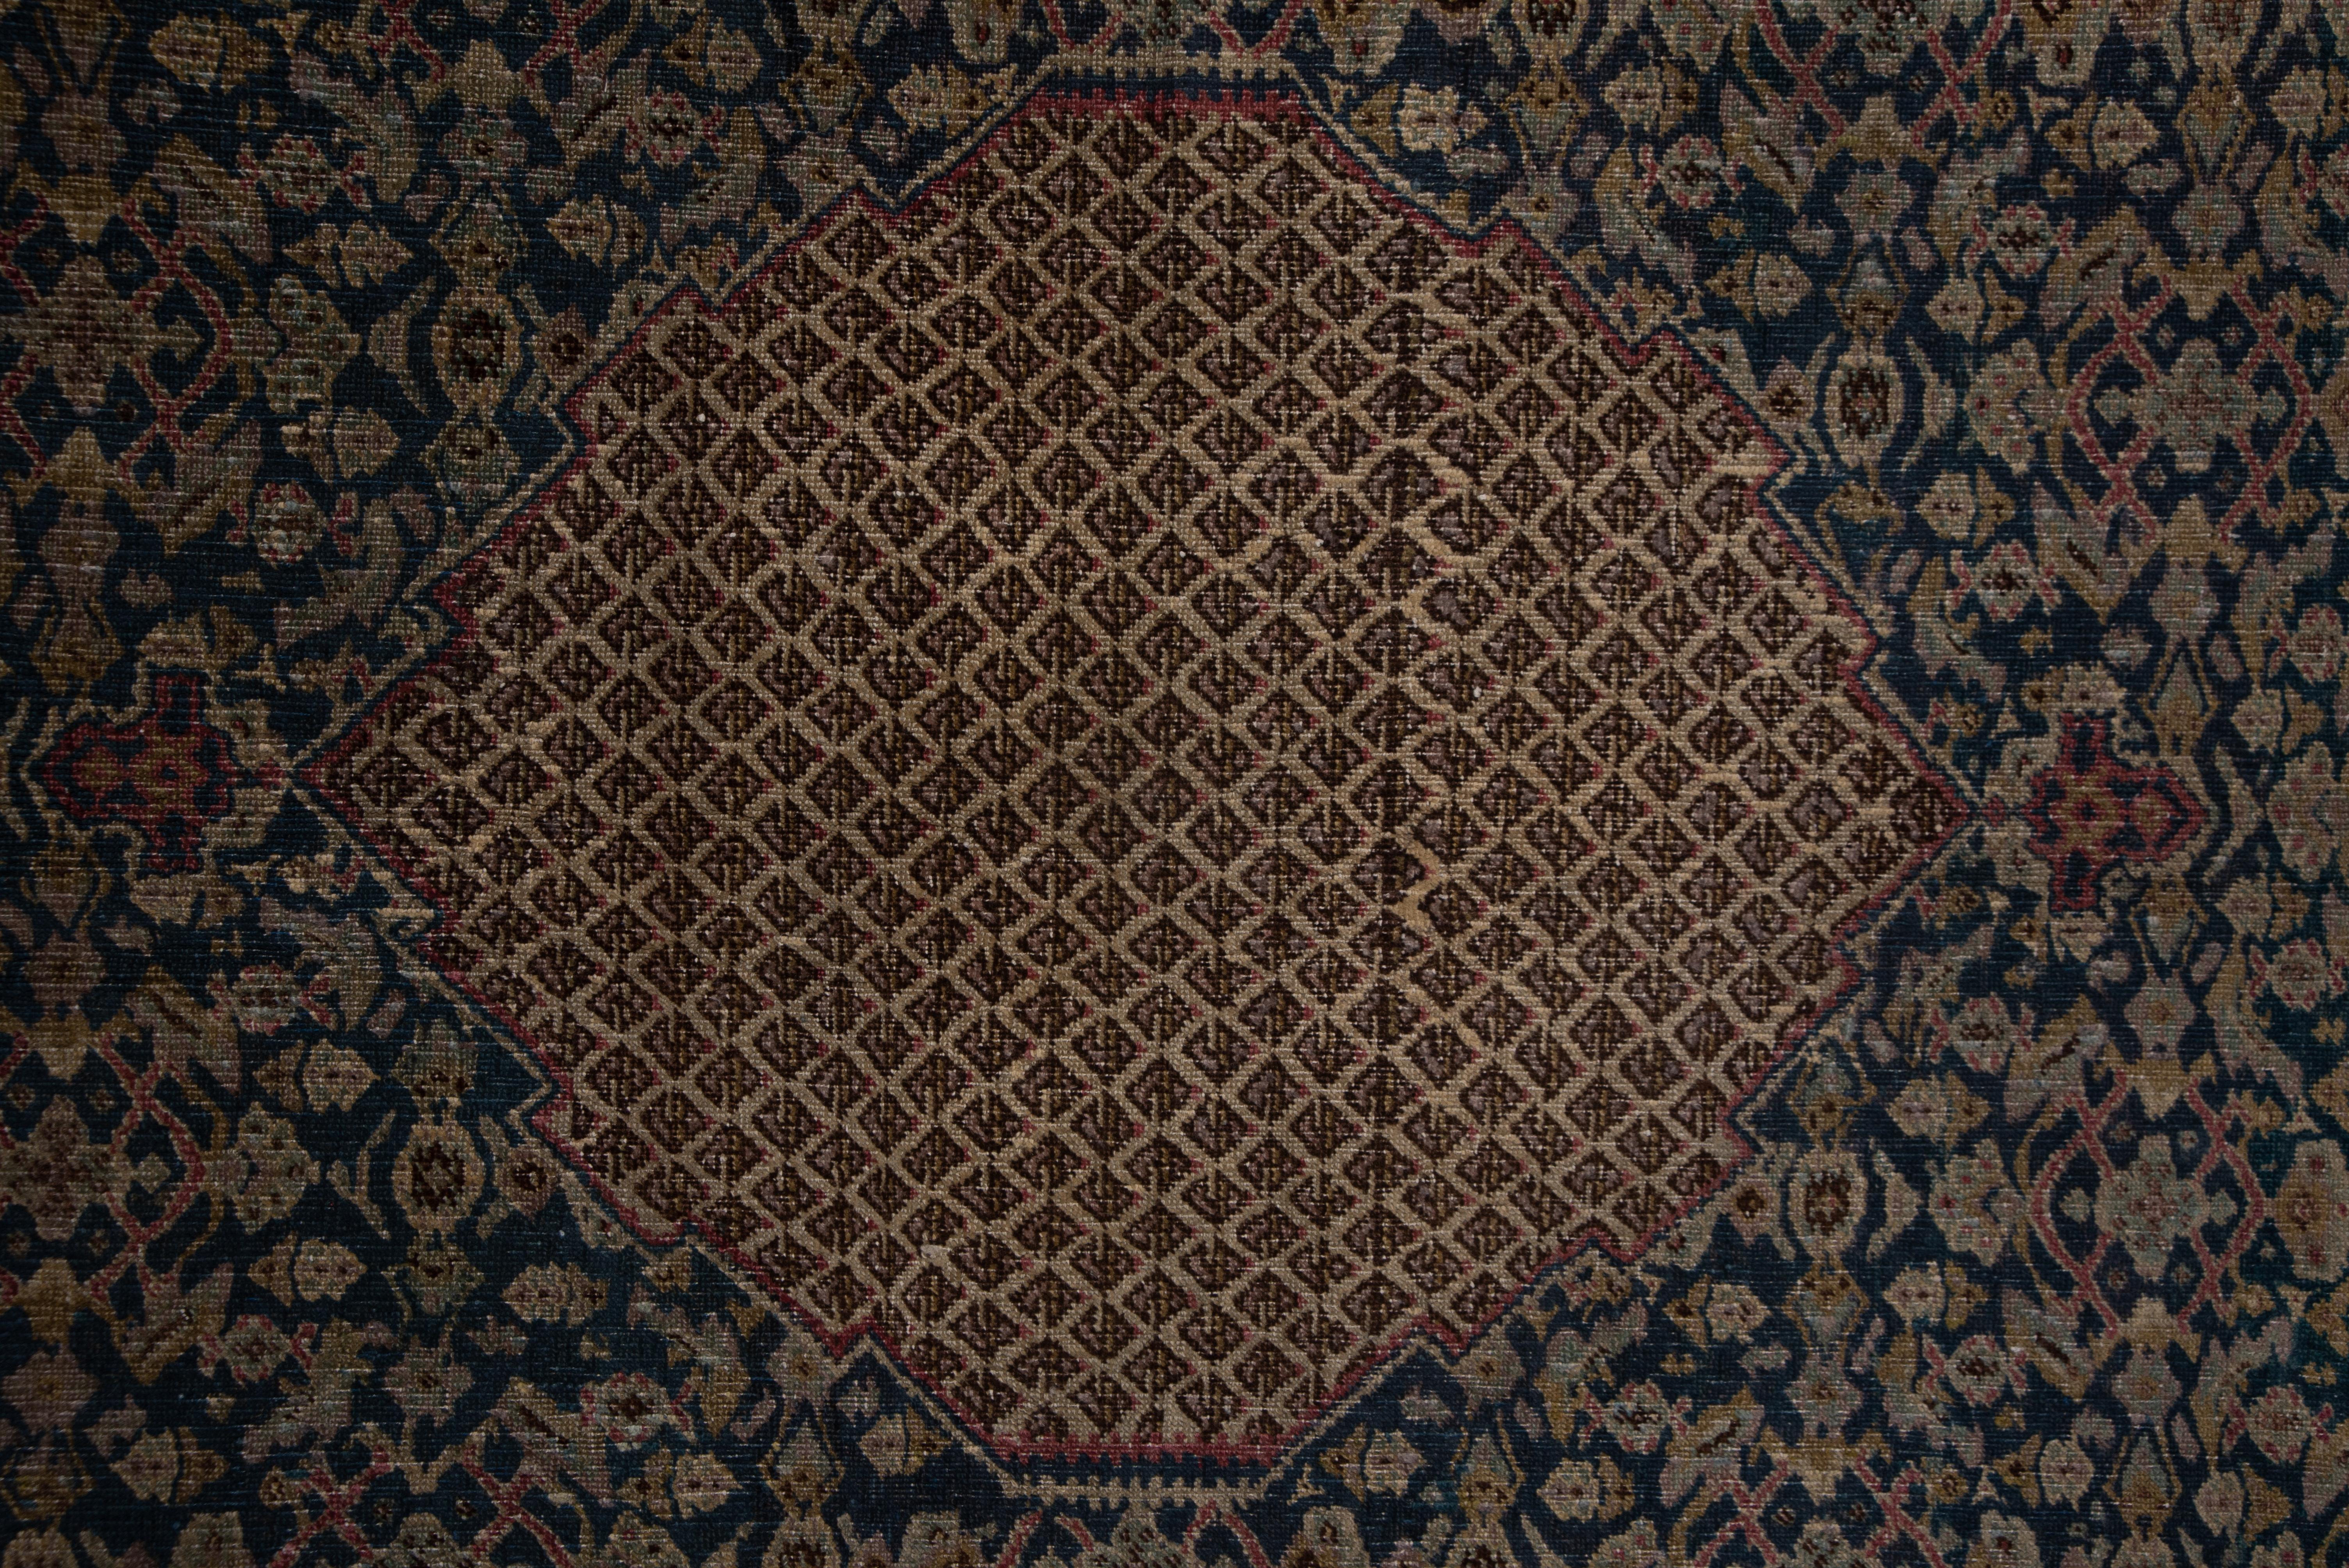 This northern Indian town rug has a layered pattern with tiny bottehs in the joined beige corners, a dark blue hexagonal field with an all-over Herati design, and a notched medallion in cream with a small lozenge diaper. The square fringes on the